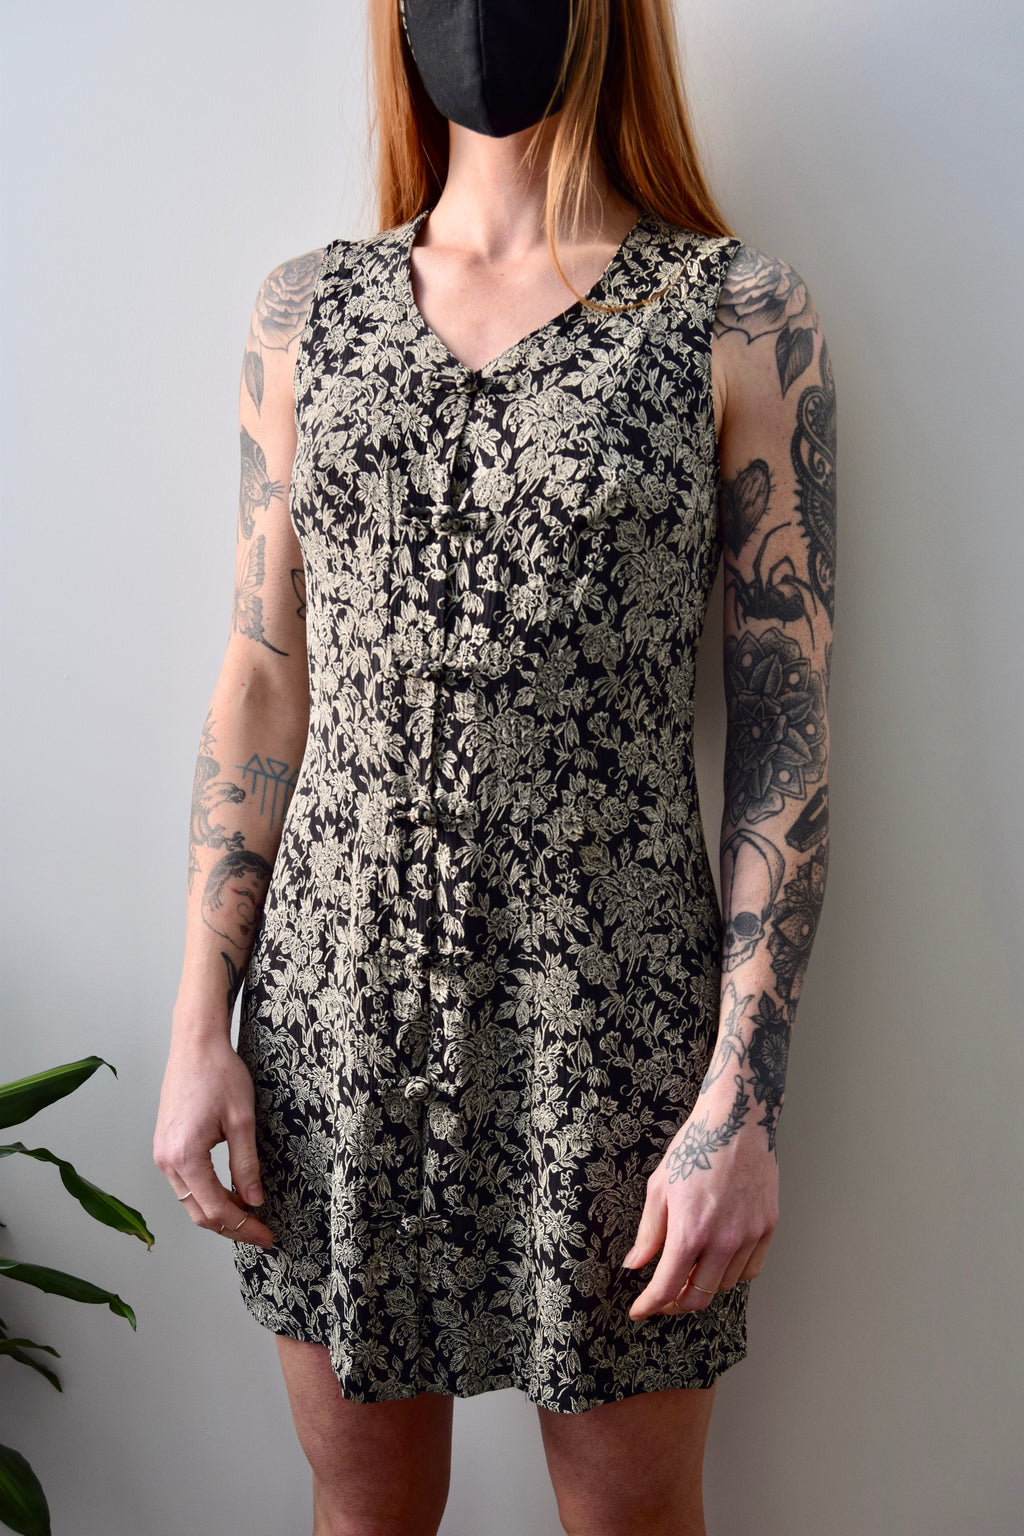 Nineties Black and White Floral Dress